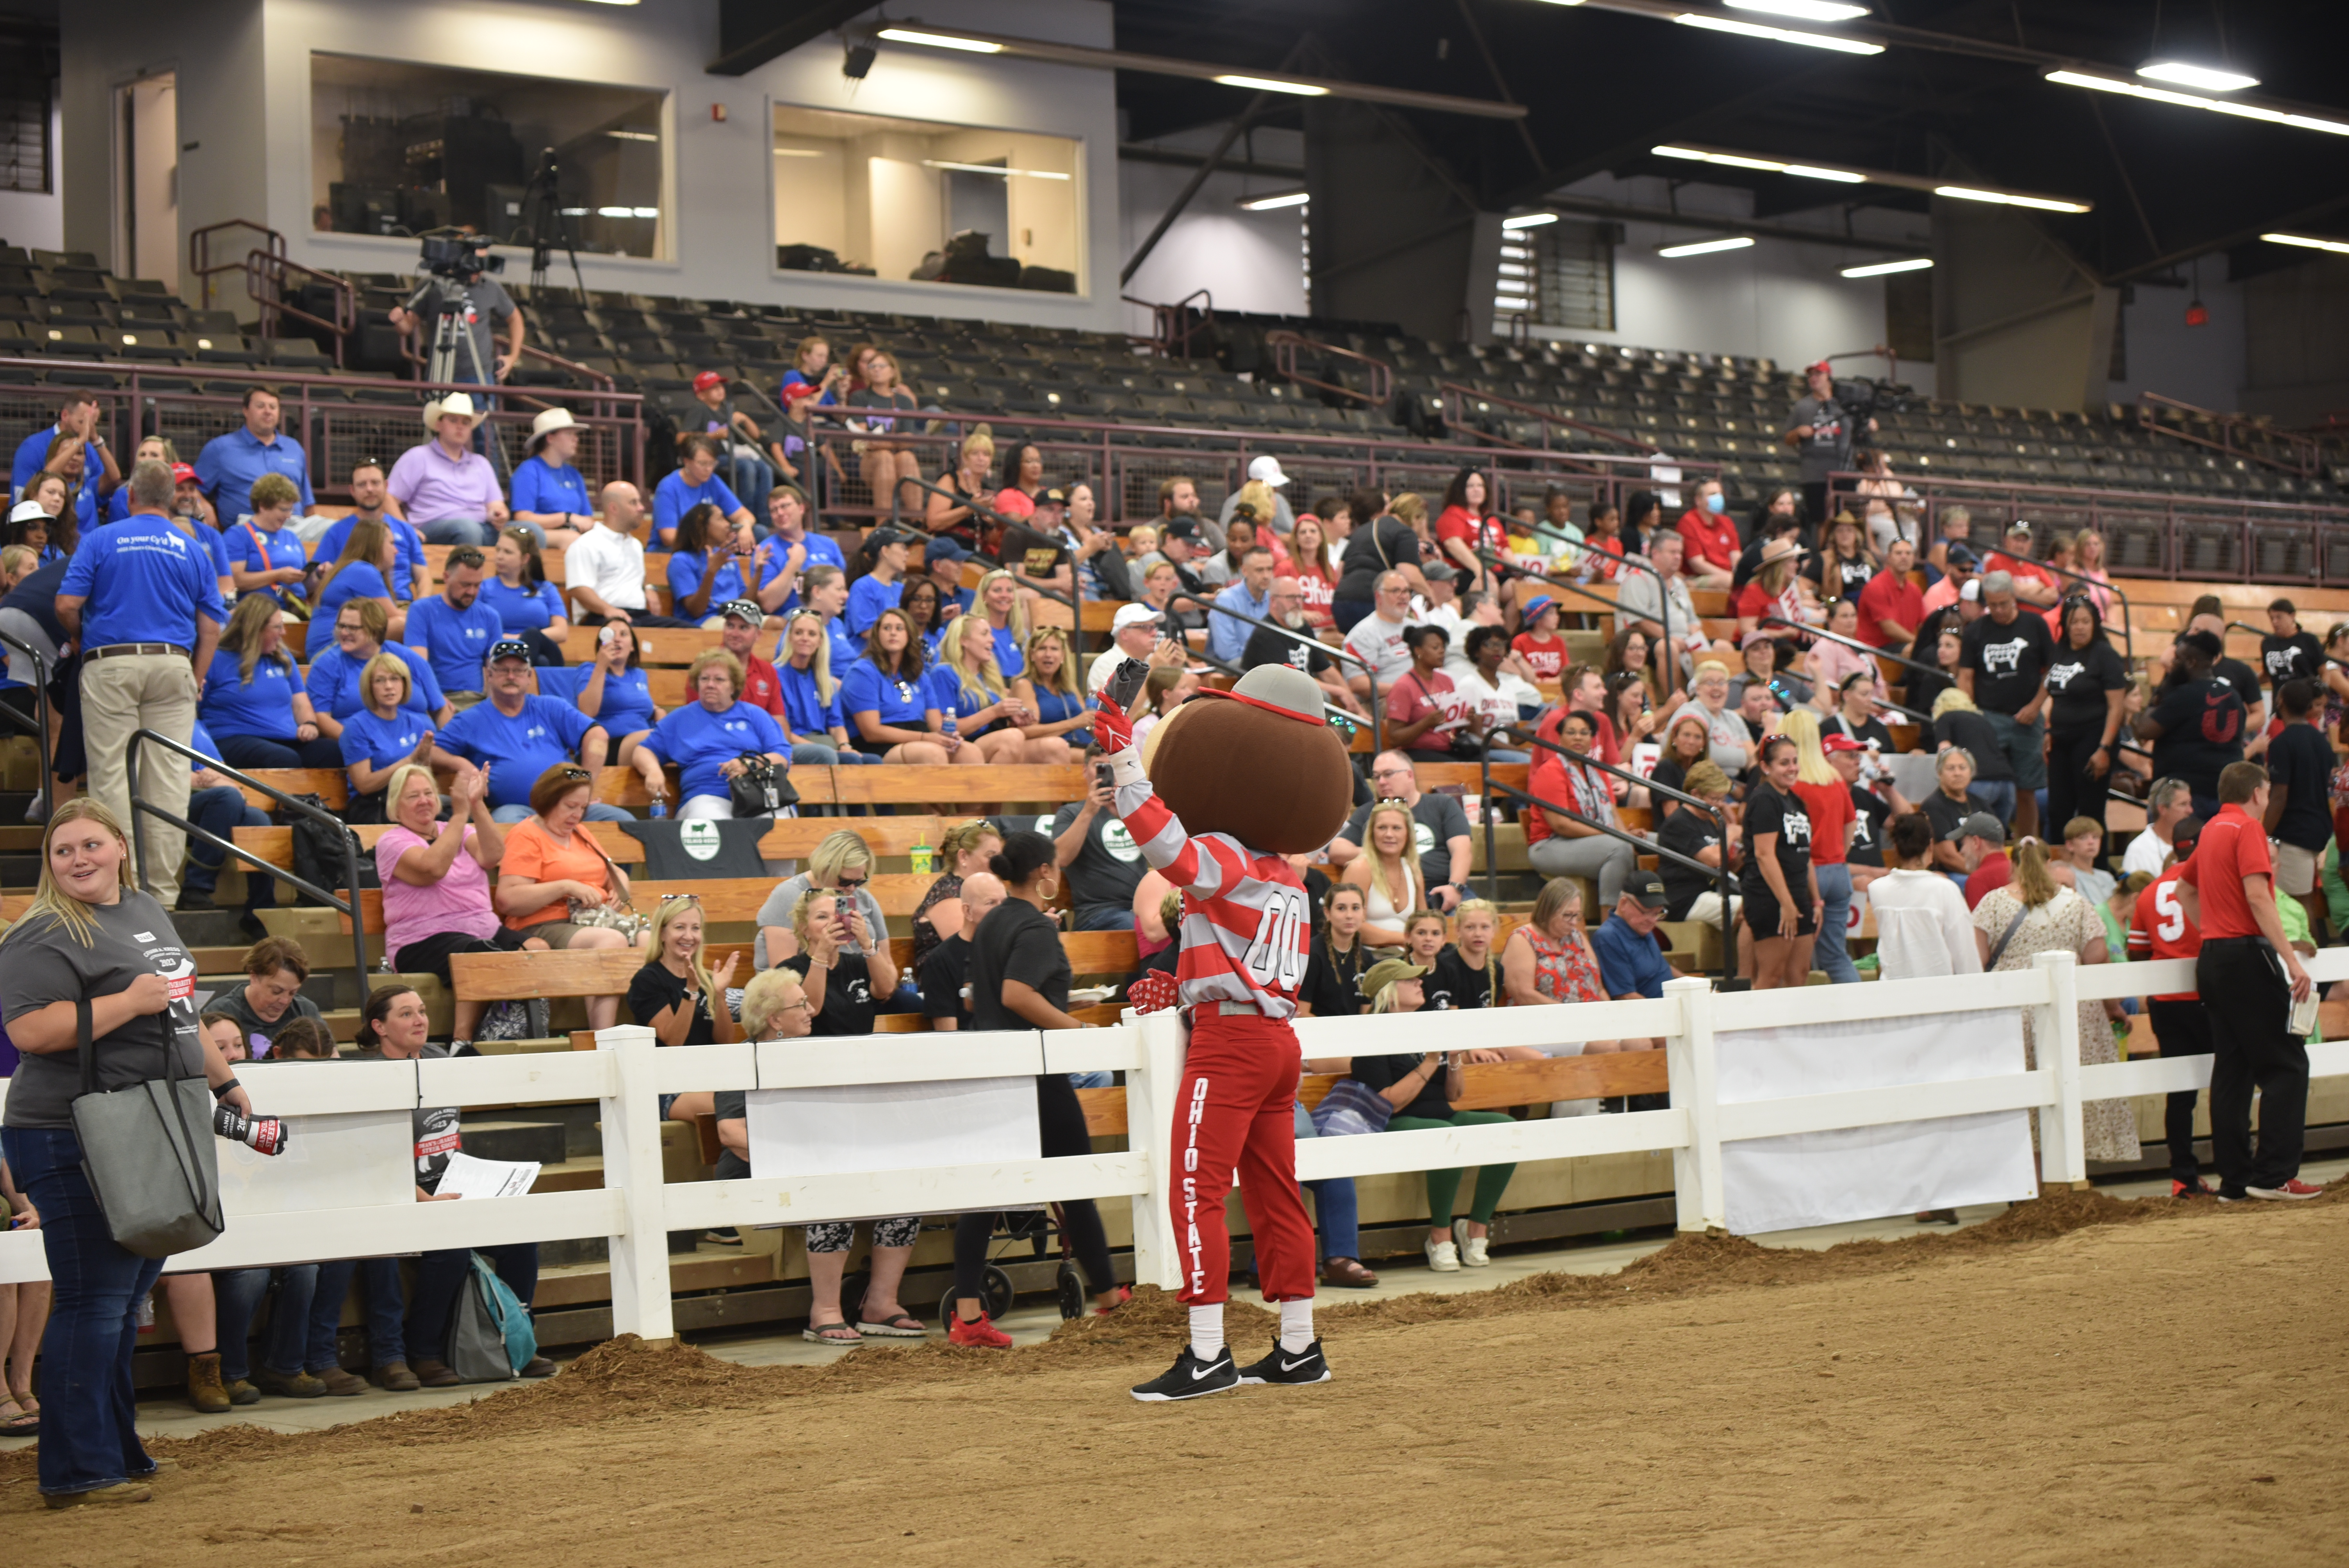 Agricultural community steps up big for Ronald McDonald House at Dean’s Charity Steer Show